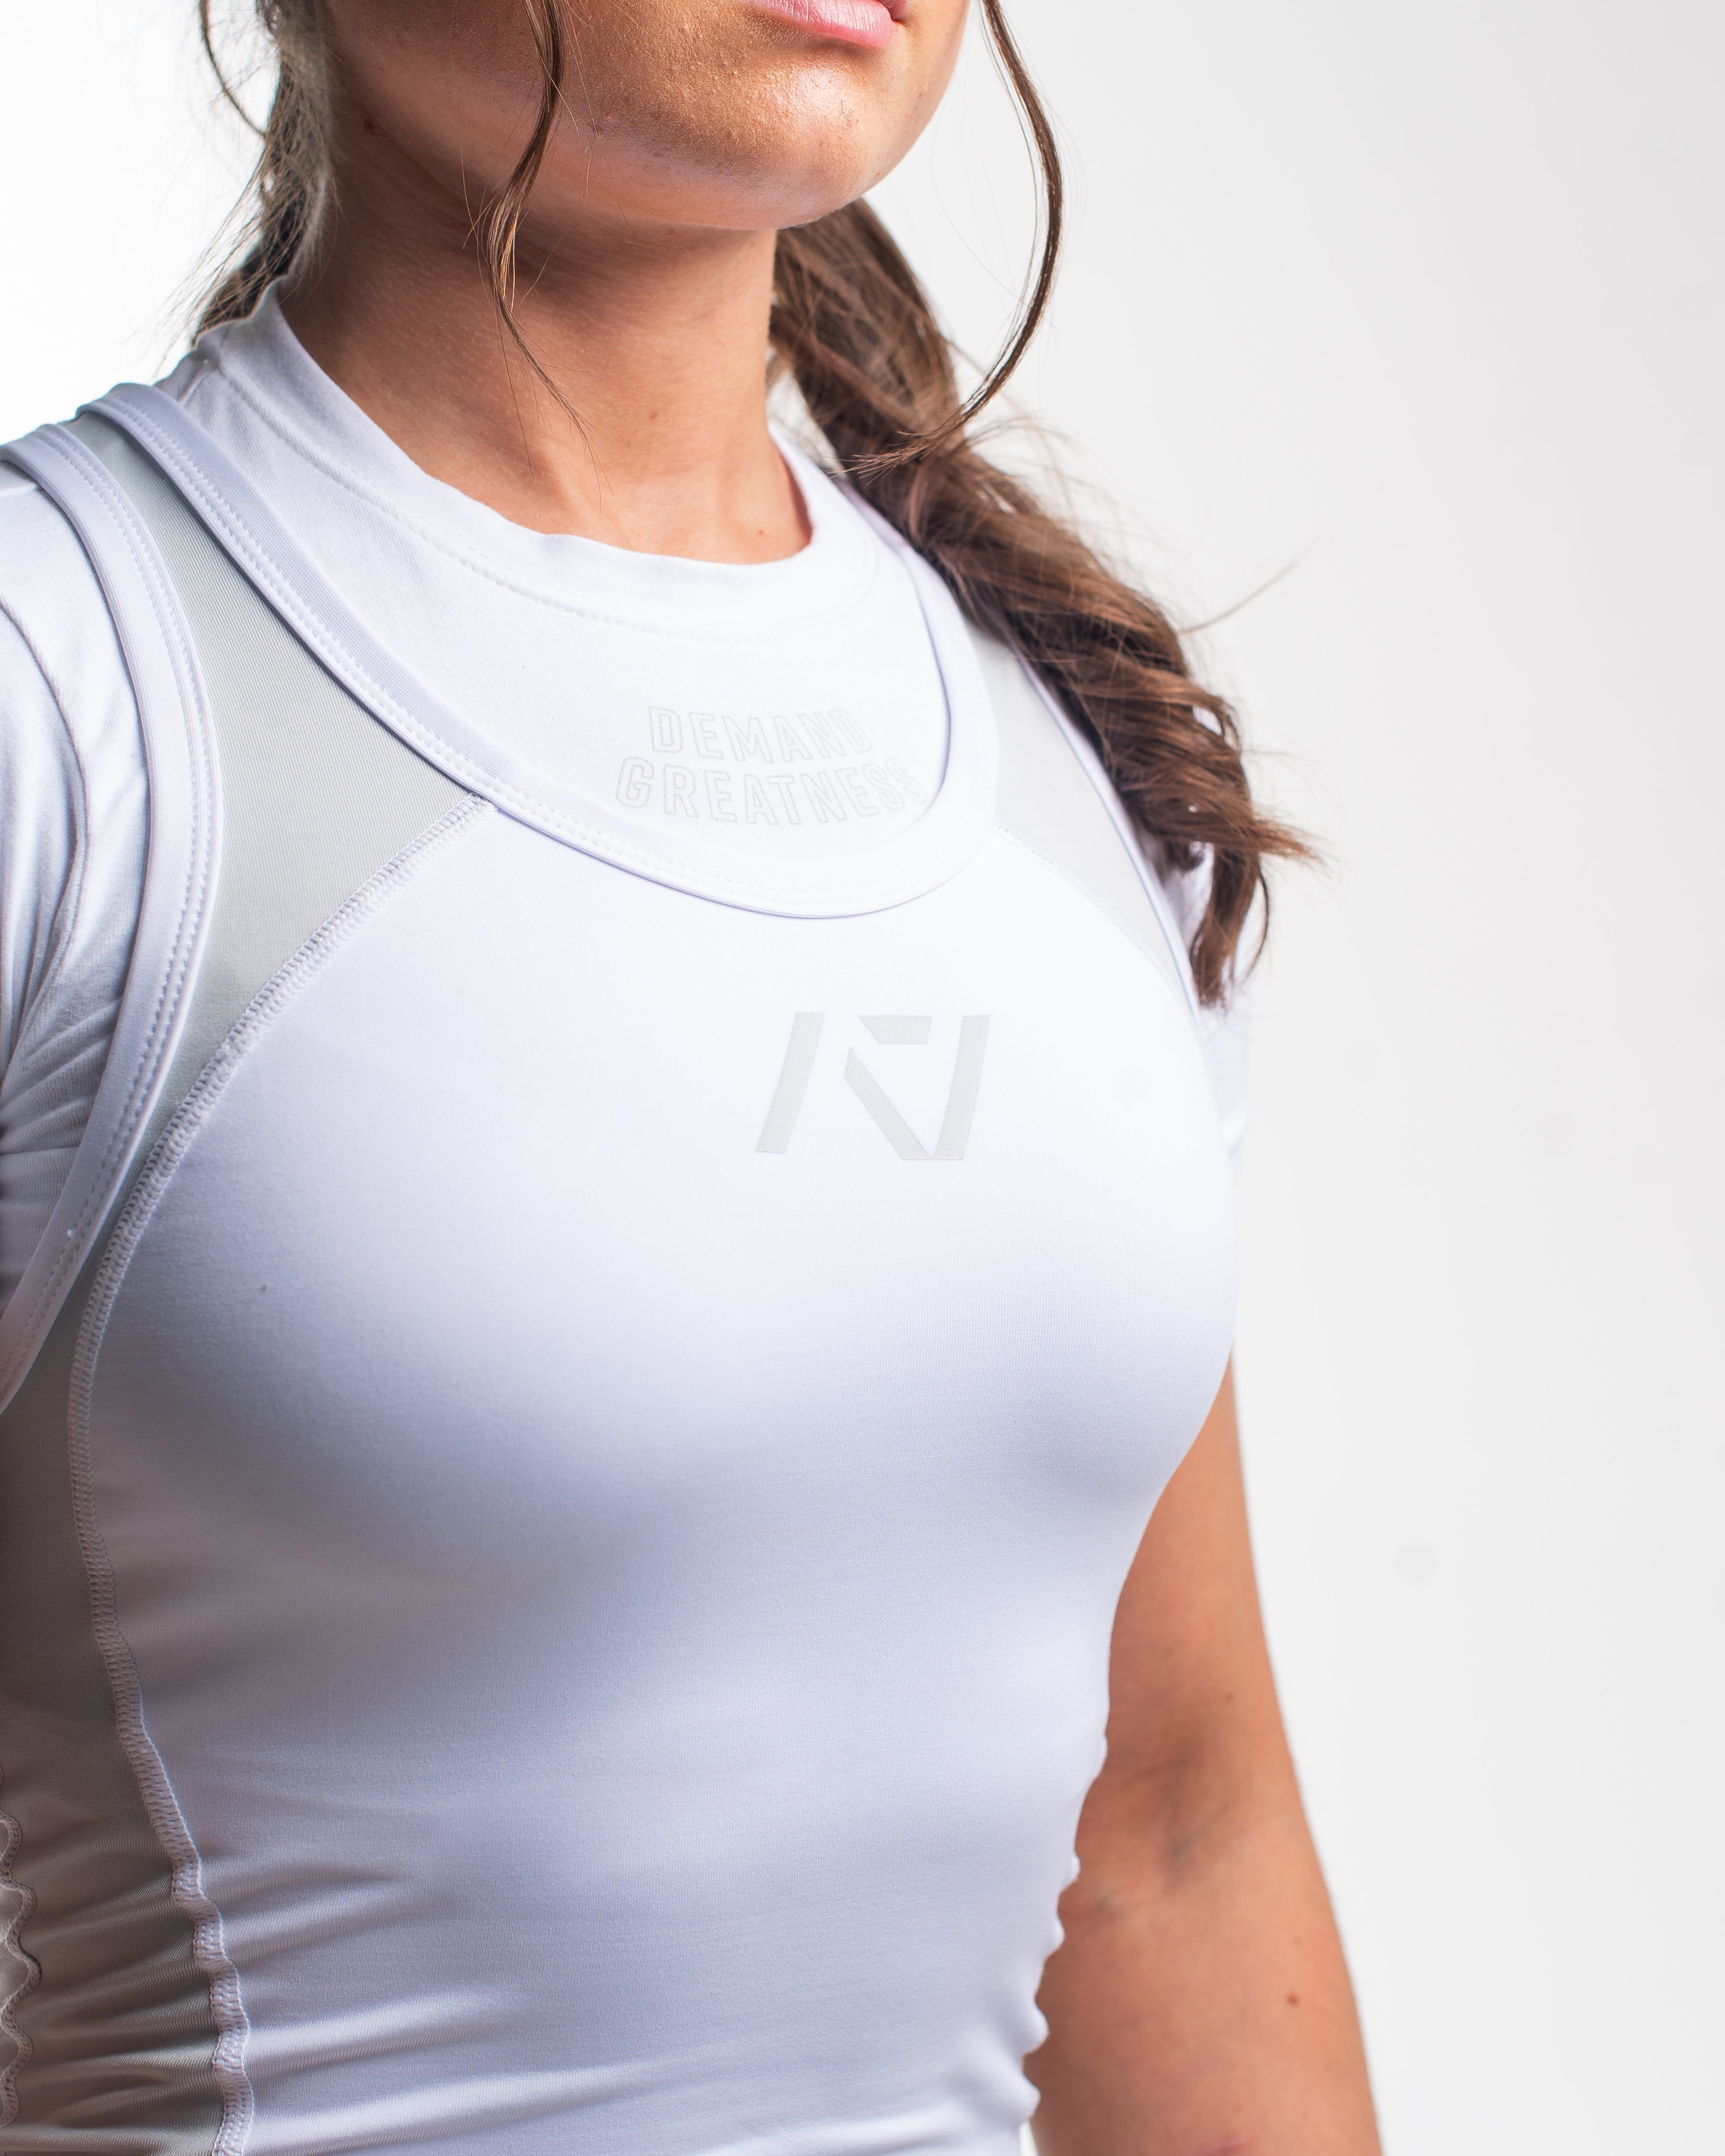 A7 IPF Approved Polar Luno singlet features extra lat mobility, side panel stitching to guide the squat depth level and curved panel design for a slimming look. The Women's cut singlet features a tapered waist and additional quad room. The IPF Approved Kit includes Luno Powerlifting Singlet, A7 Meet Shirt, A7 Zebra Wrist Wraps, A7 Deadlift Socks, Hourglass Knee Sleeves (Stiff Knee Sleeves and Rigor Mortis Knee Sleeves). All A7 Powerlifting Equipment shipping to UK, Norway, Switzerland and Iceland.